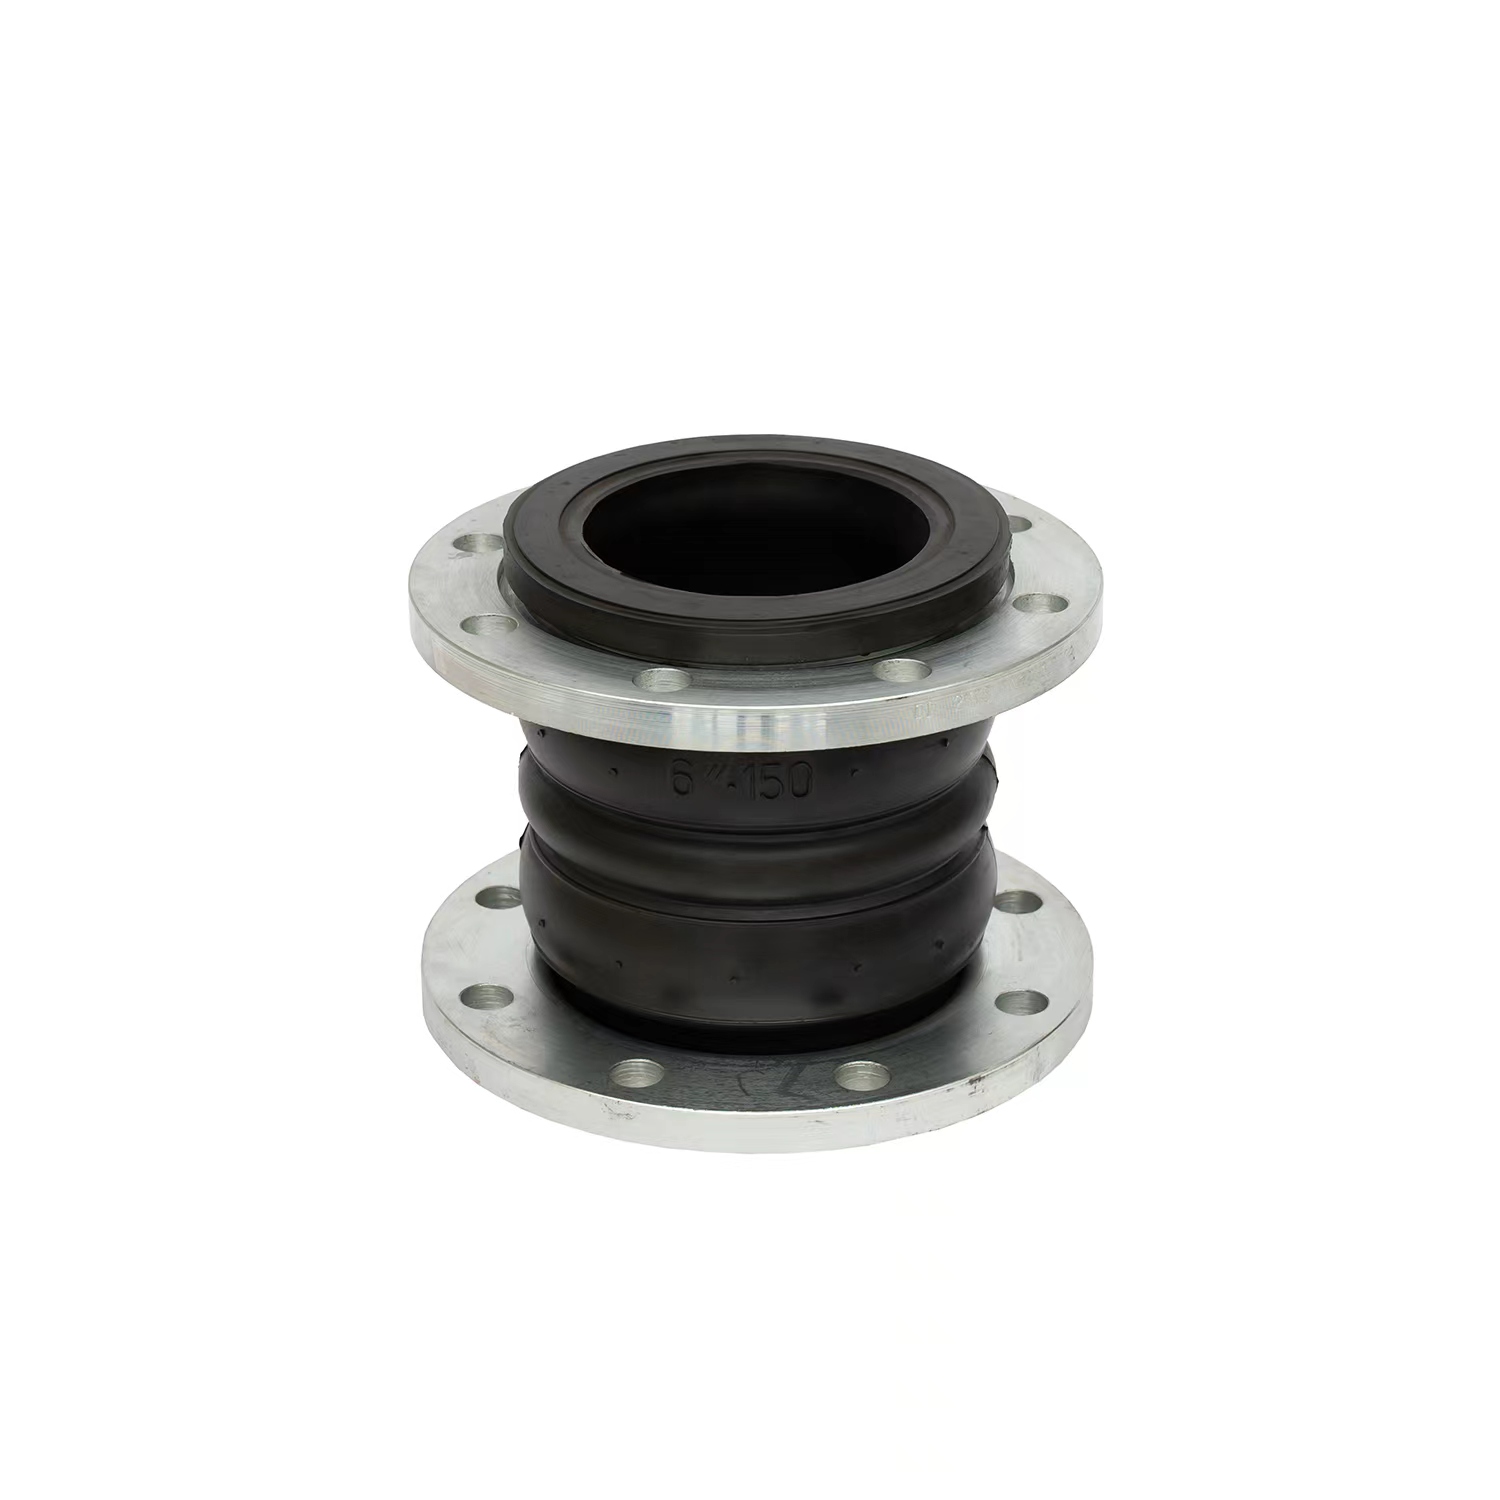 Double Ball Rubber Bellows Pipe Joint with Carbon Steel Flange Ends